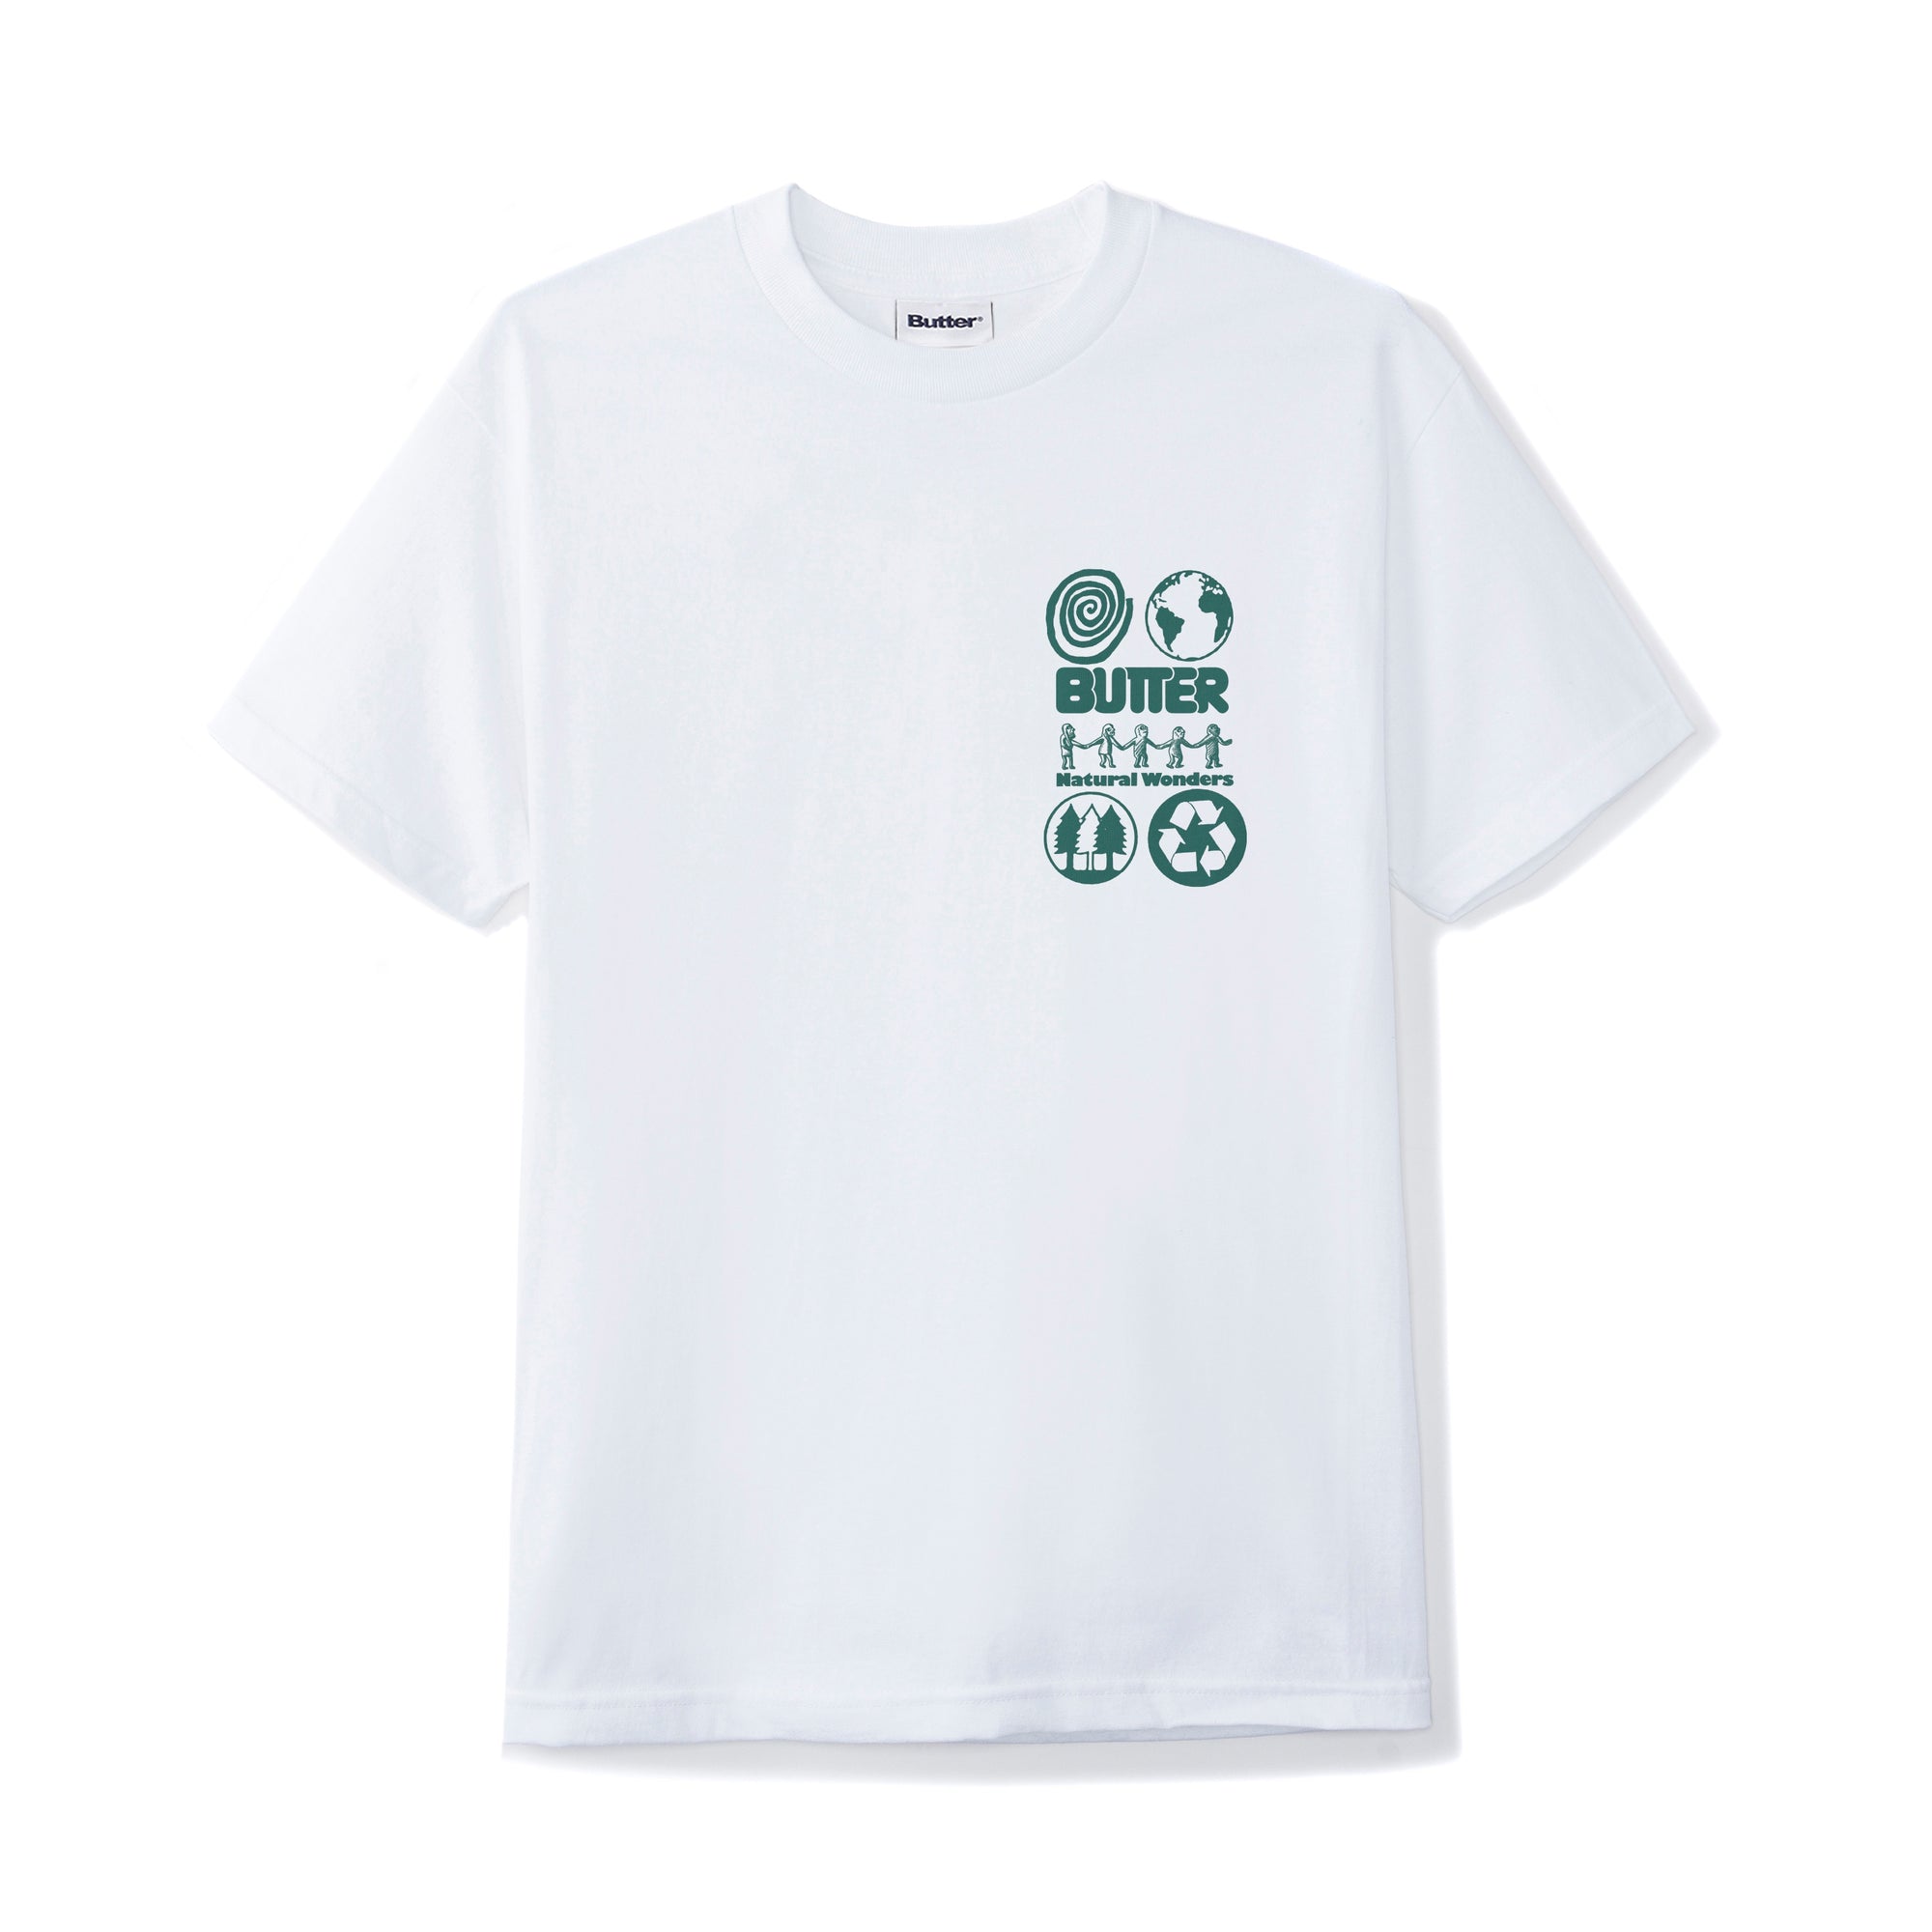 Butter Natural Wonders Tee White